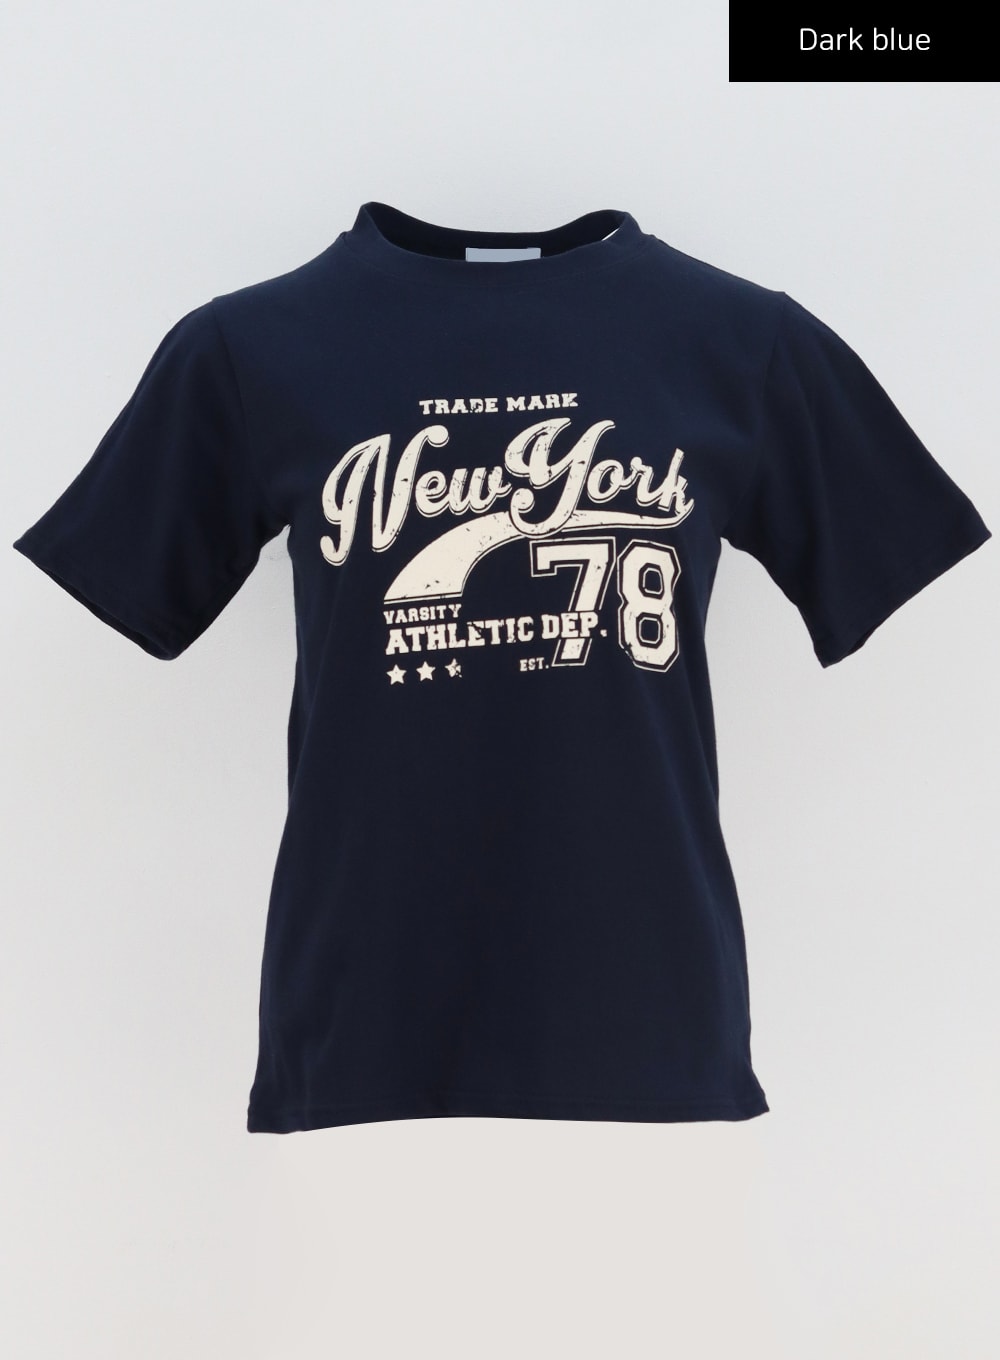 new-york-graphic-tee-by322